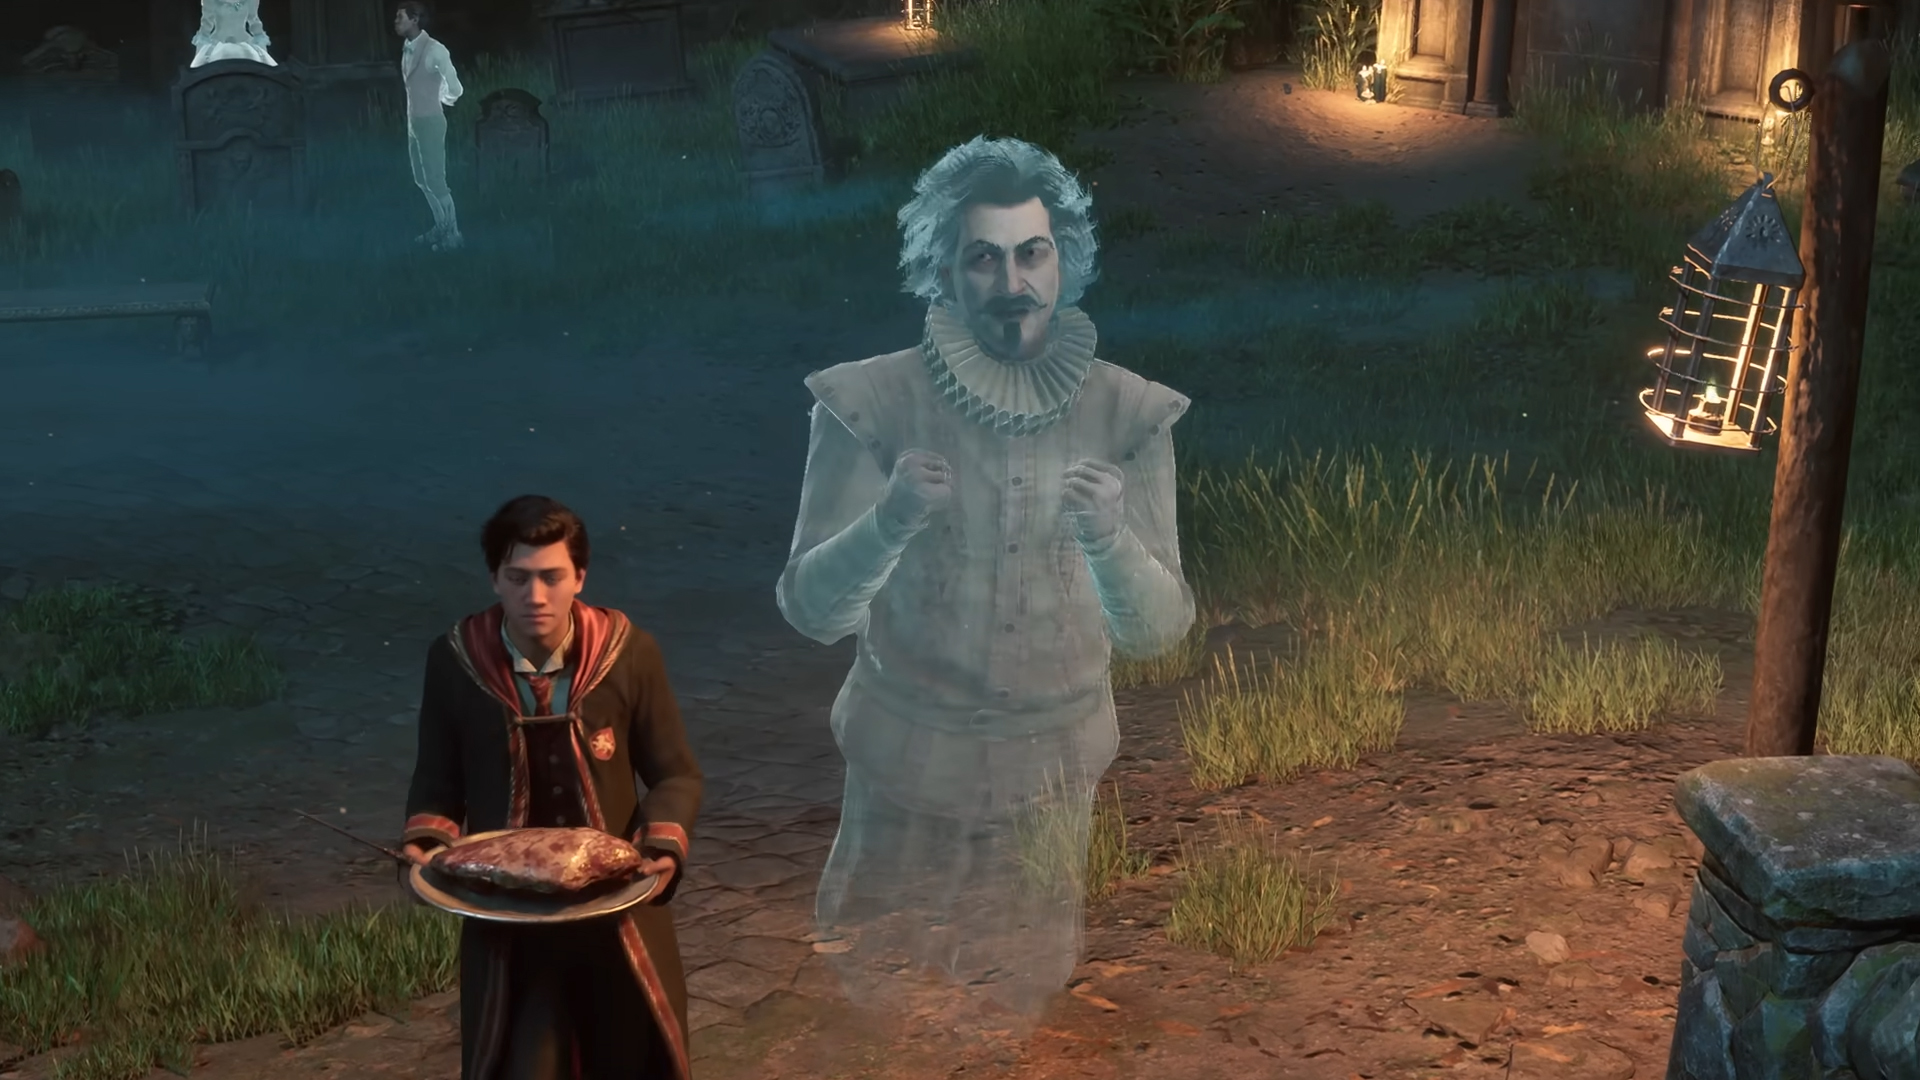 Hogwarts Legacy: 10 things we learned at PlayStation State of Play - Dexerto